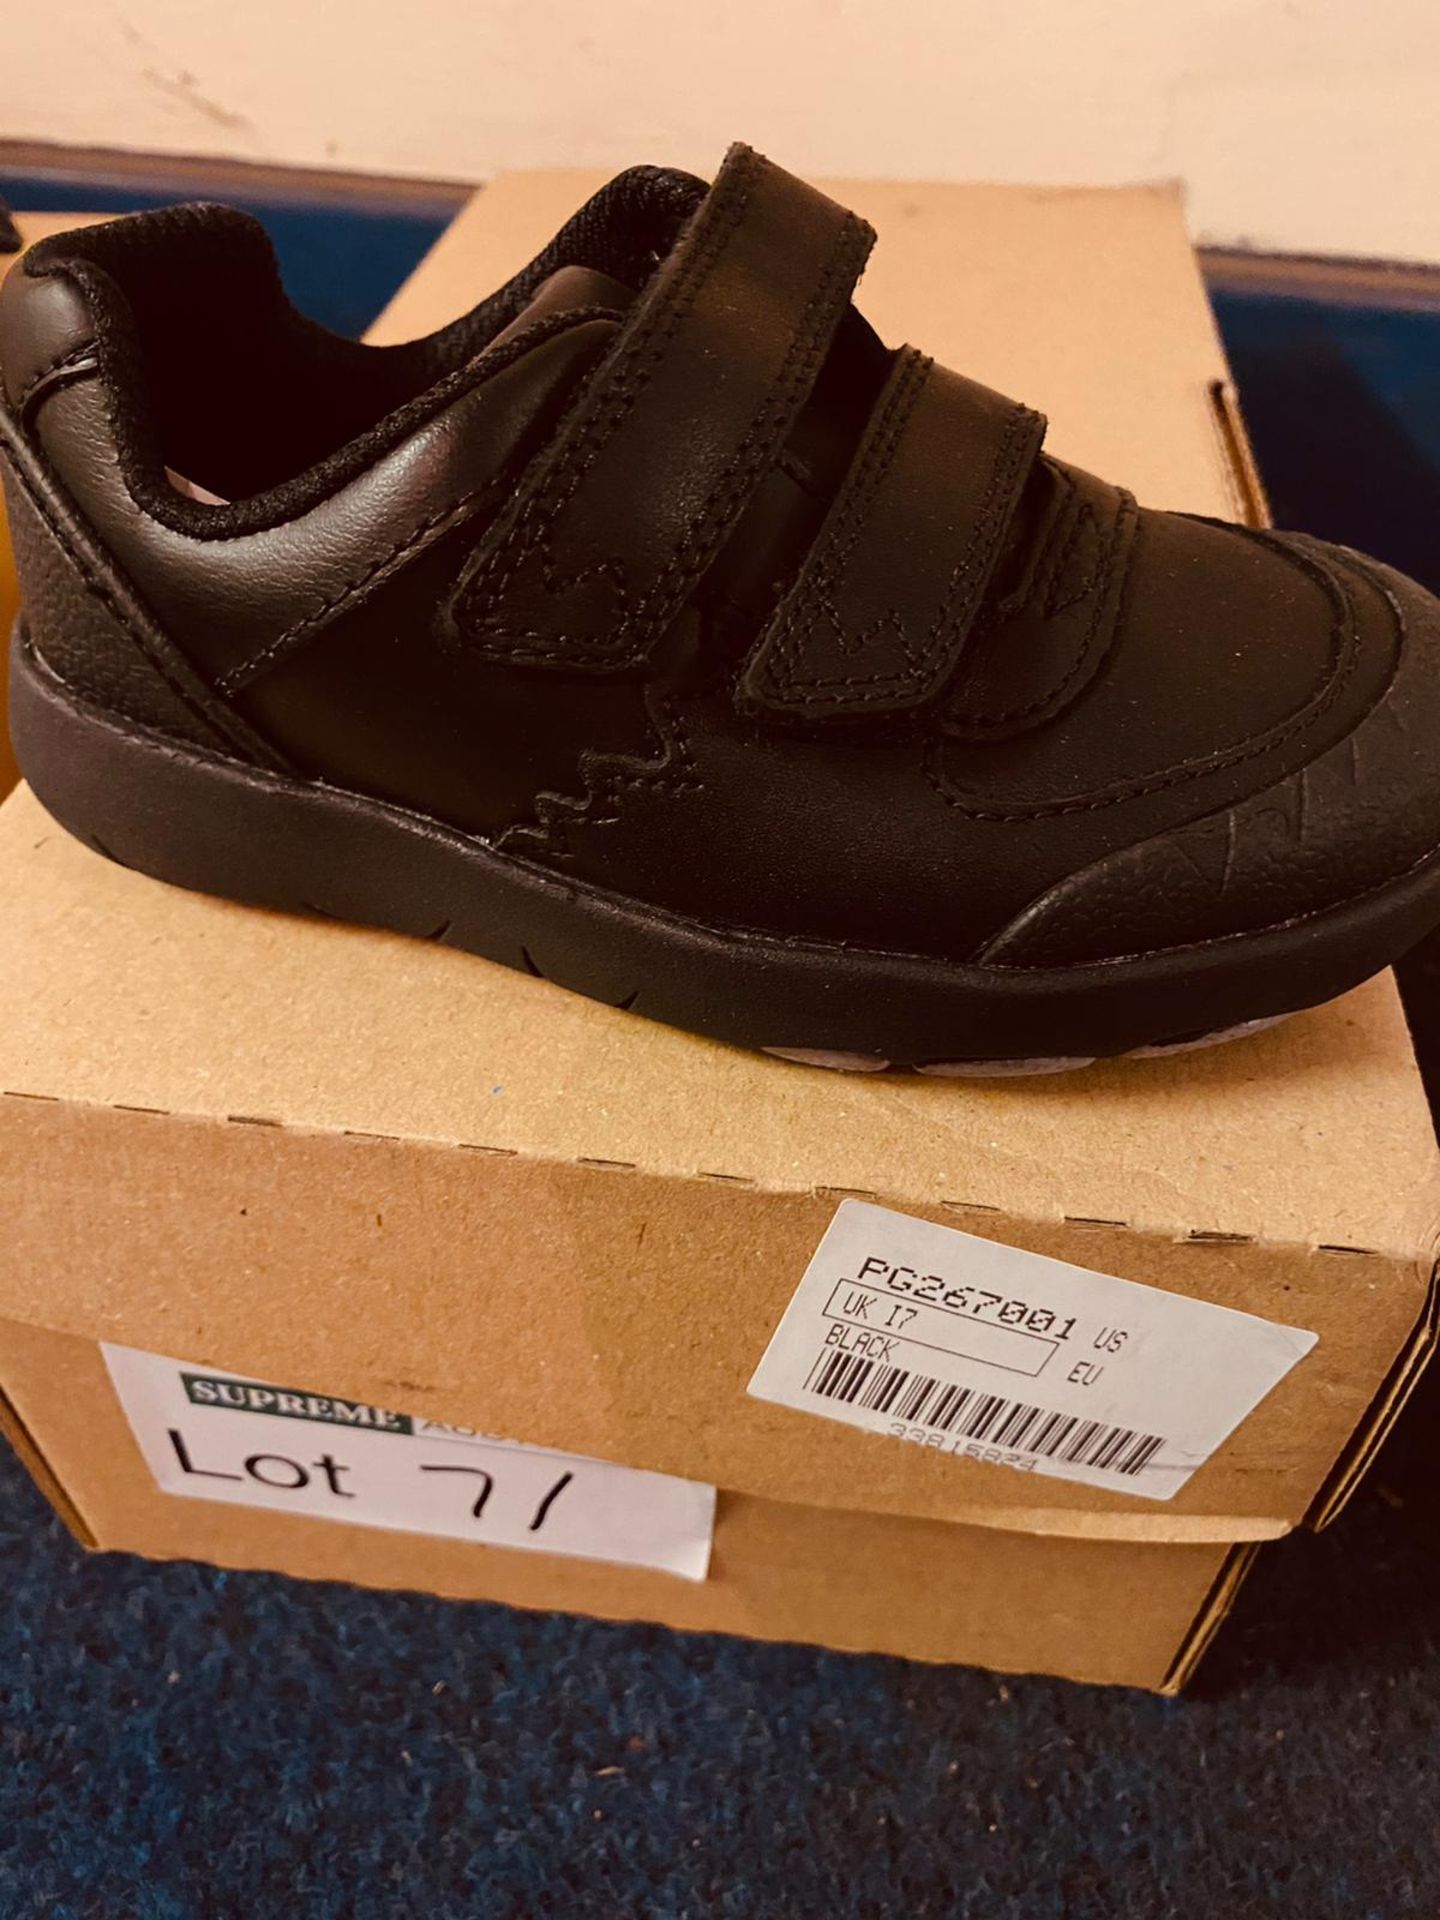 NEW AND BOXED BLACK CLARKS I-7